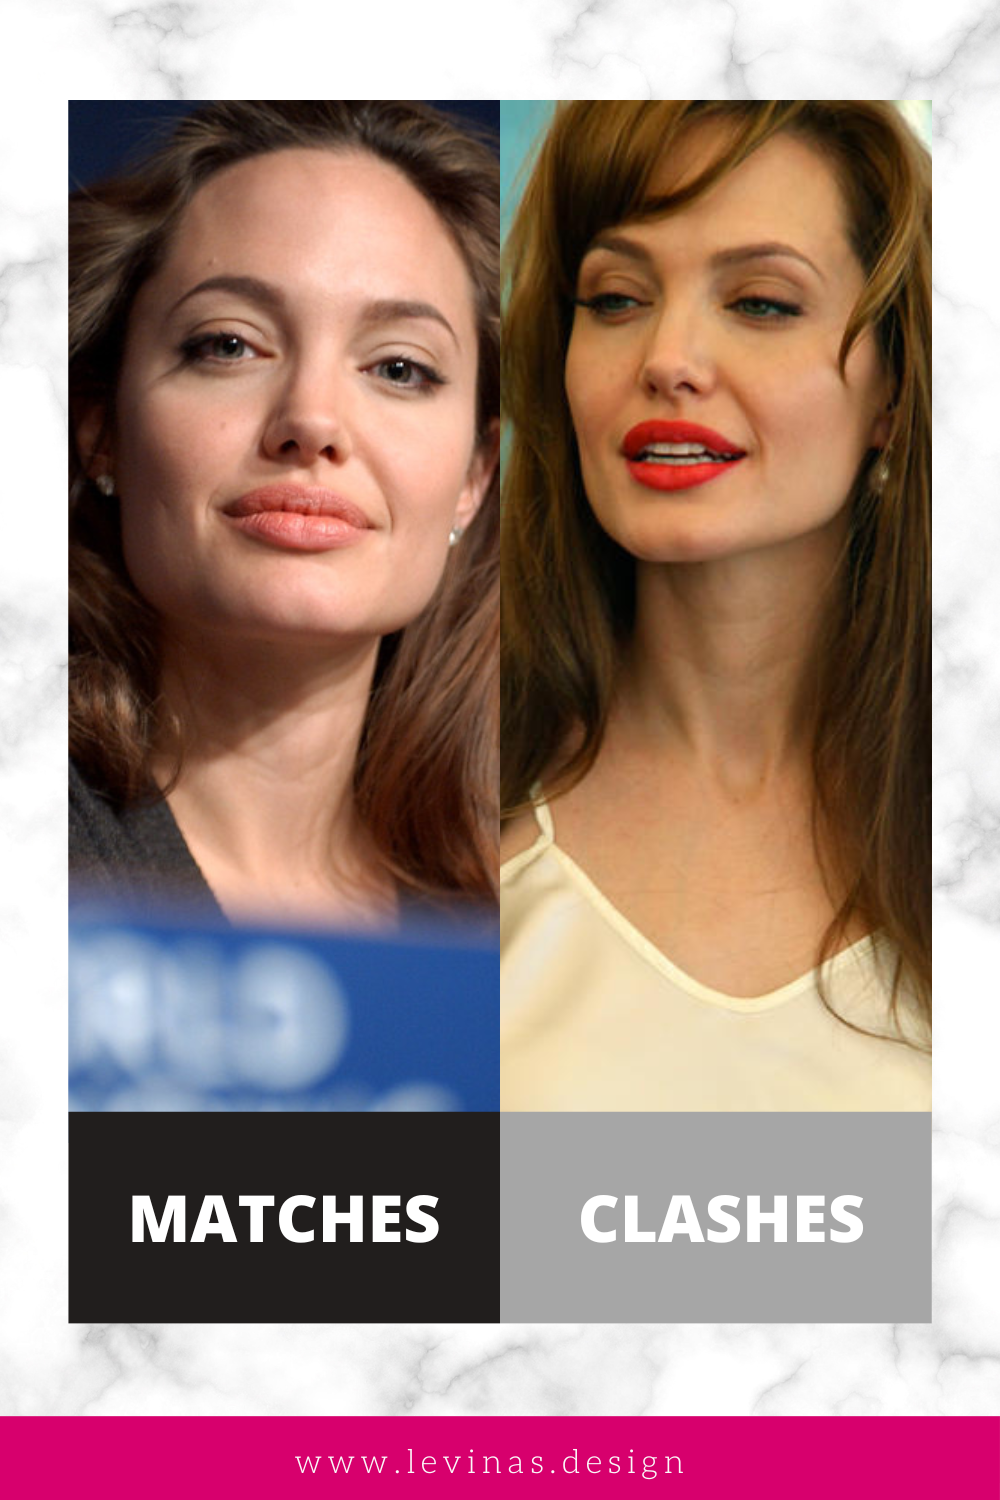 Angelina Jolie Color Season: Complete Color Analysis Within 16 Color Types